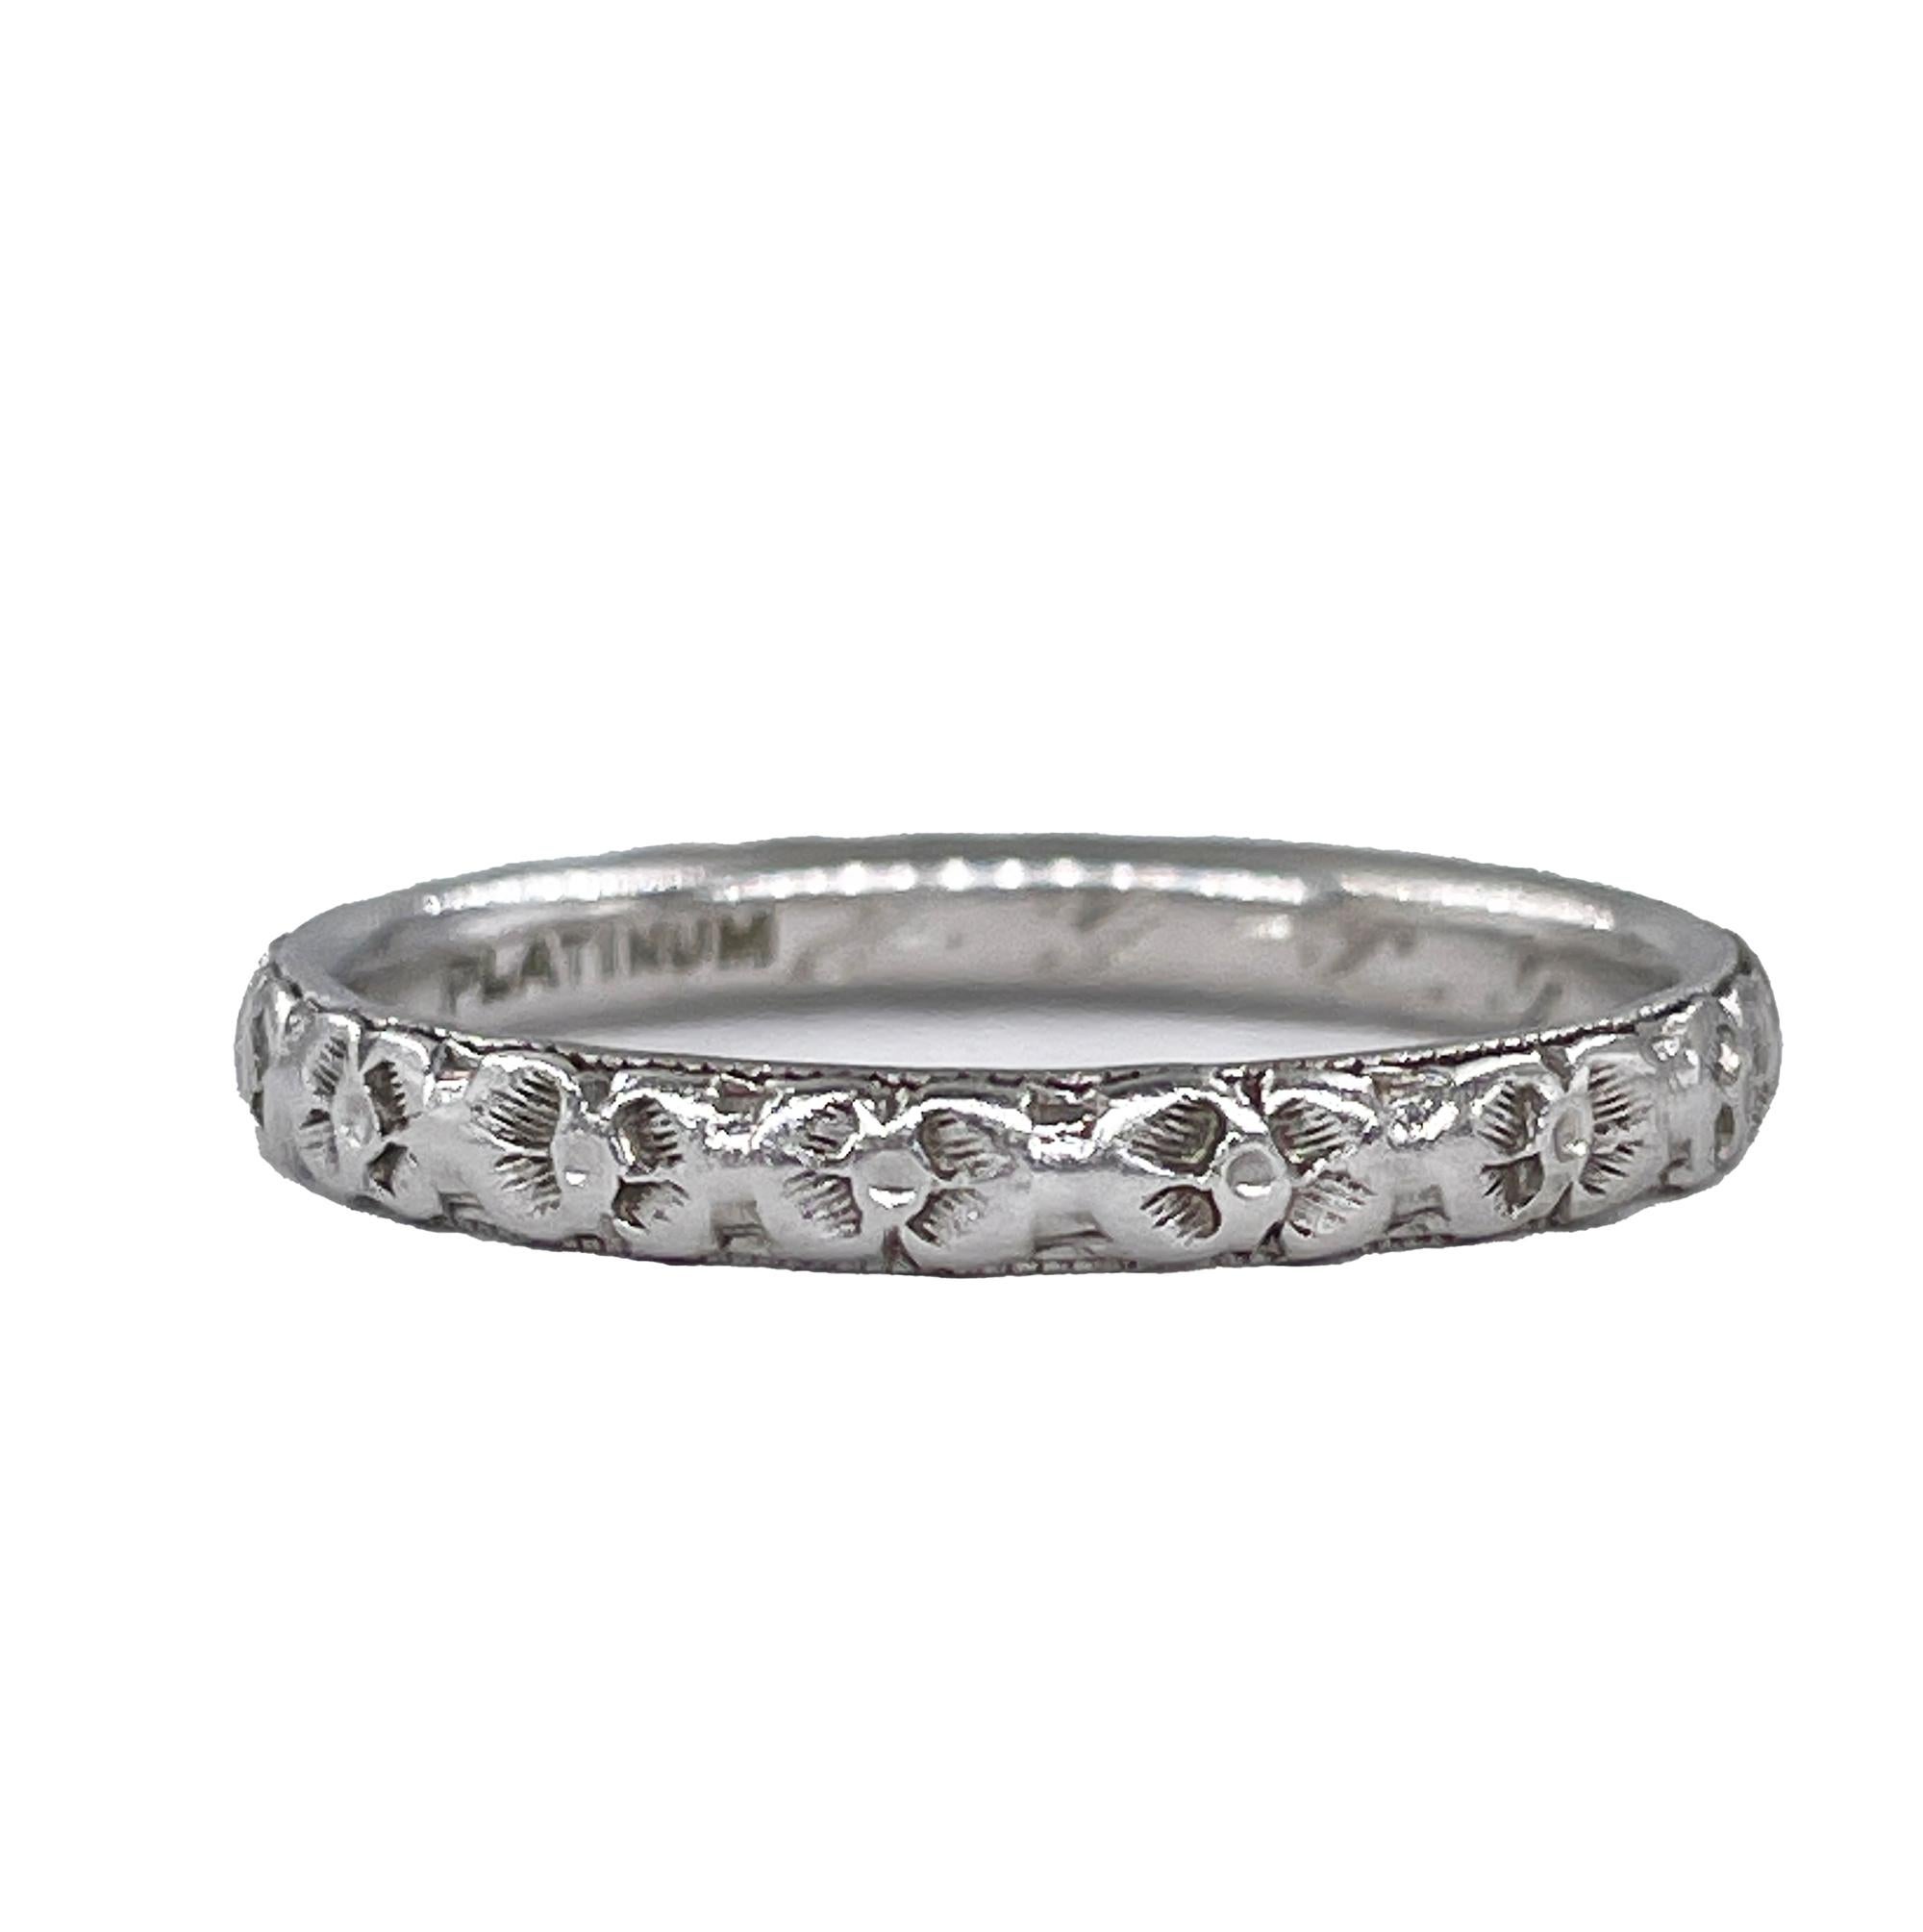 Antique sleekly thin Vintage Art Deco Wedding Band Platinum Ring
About as delicate as they come, dating from the Art Deco period, 1928, this slim wedding band, hand-fabricated in platinum with exquisite design across the this  slender and precious